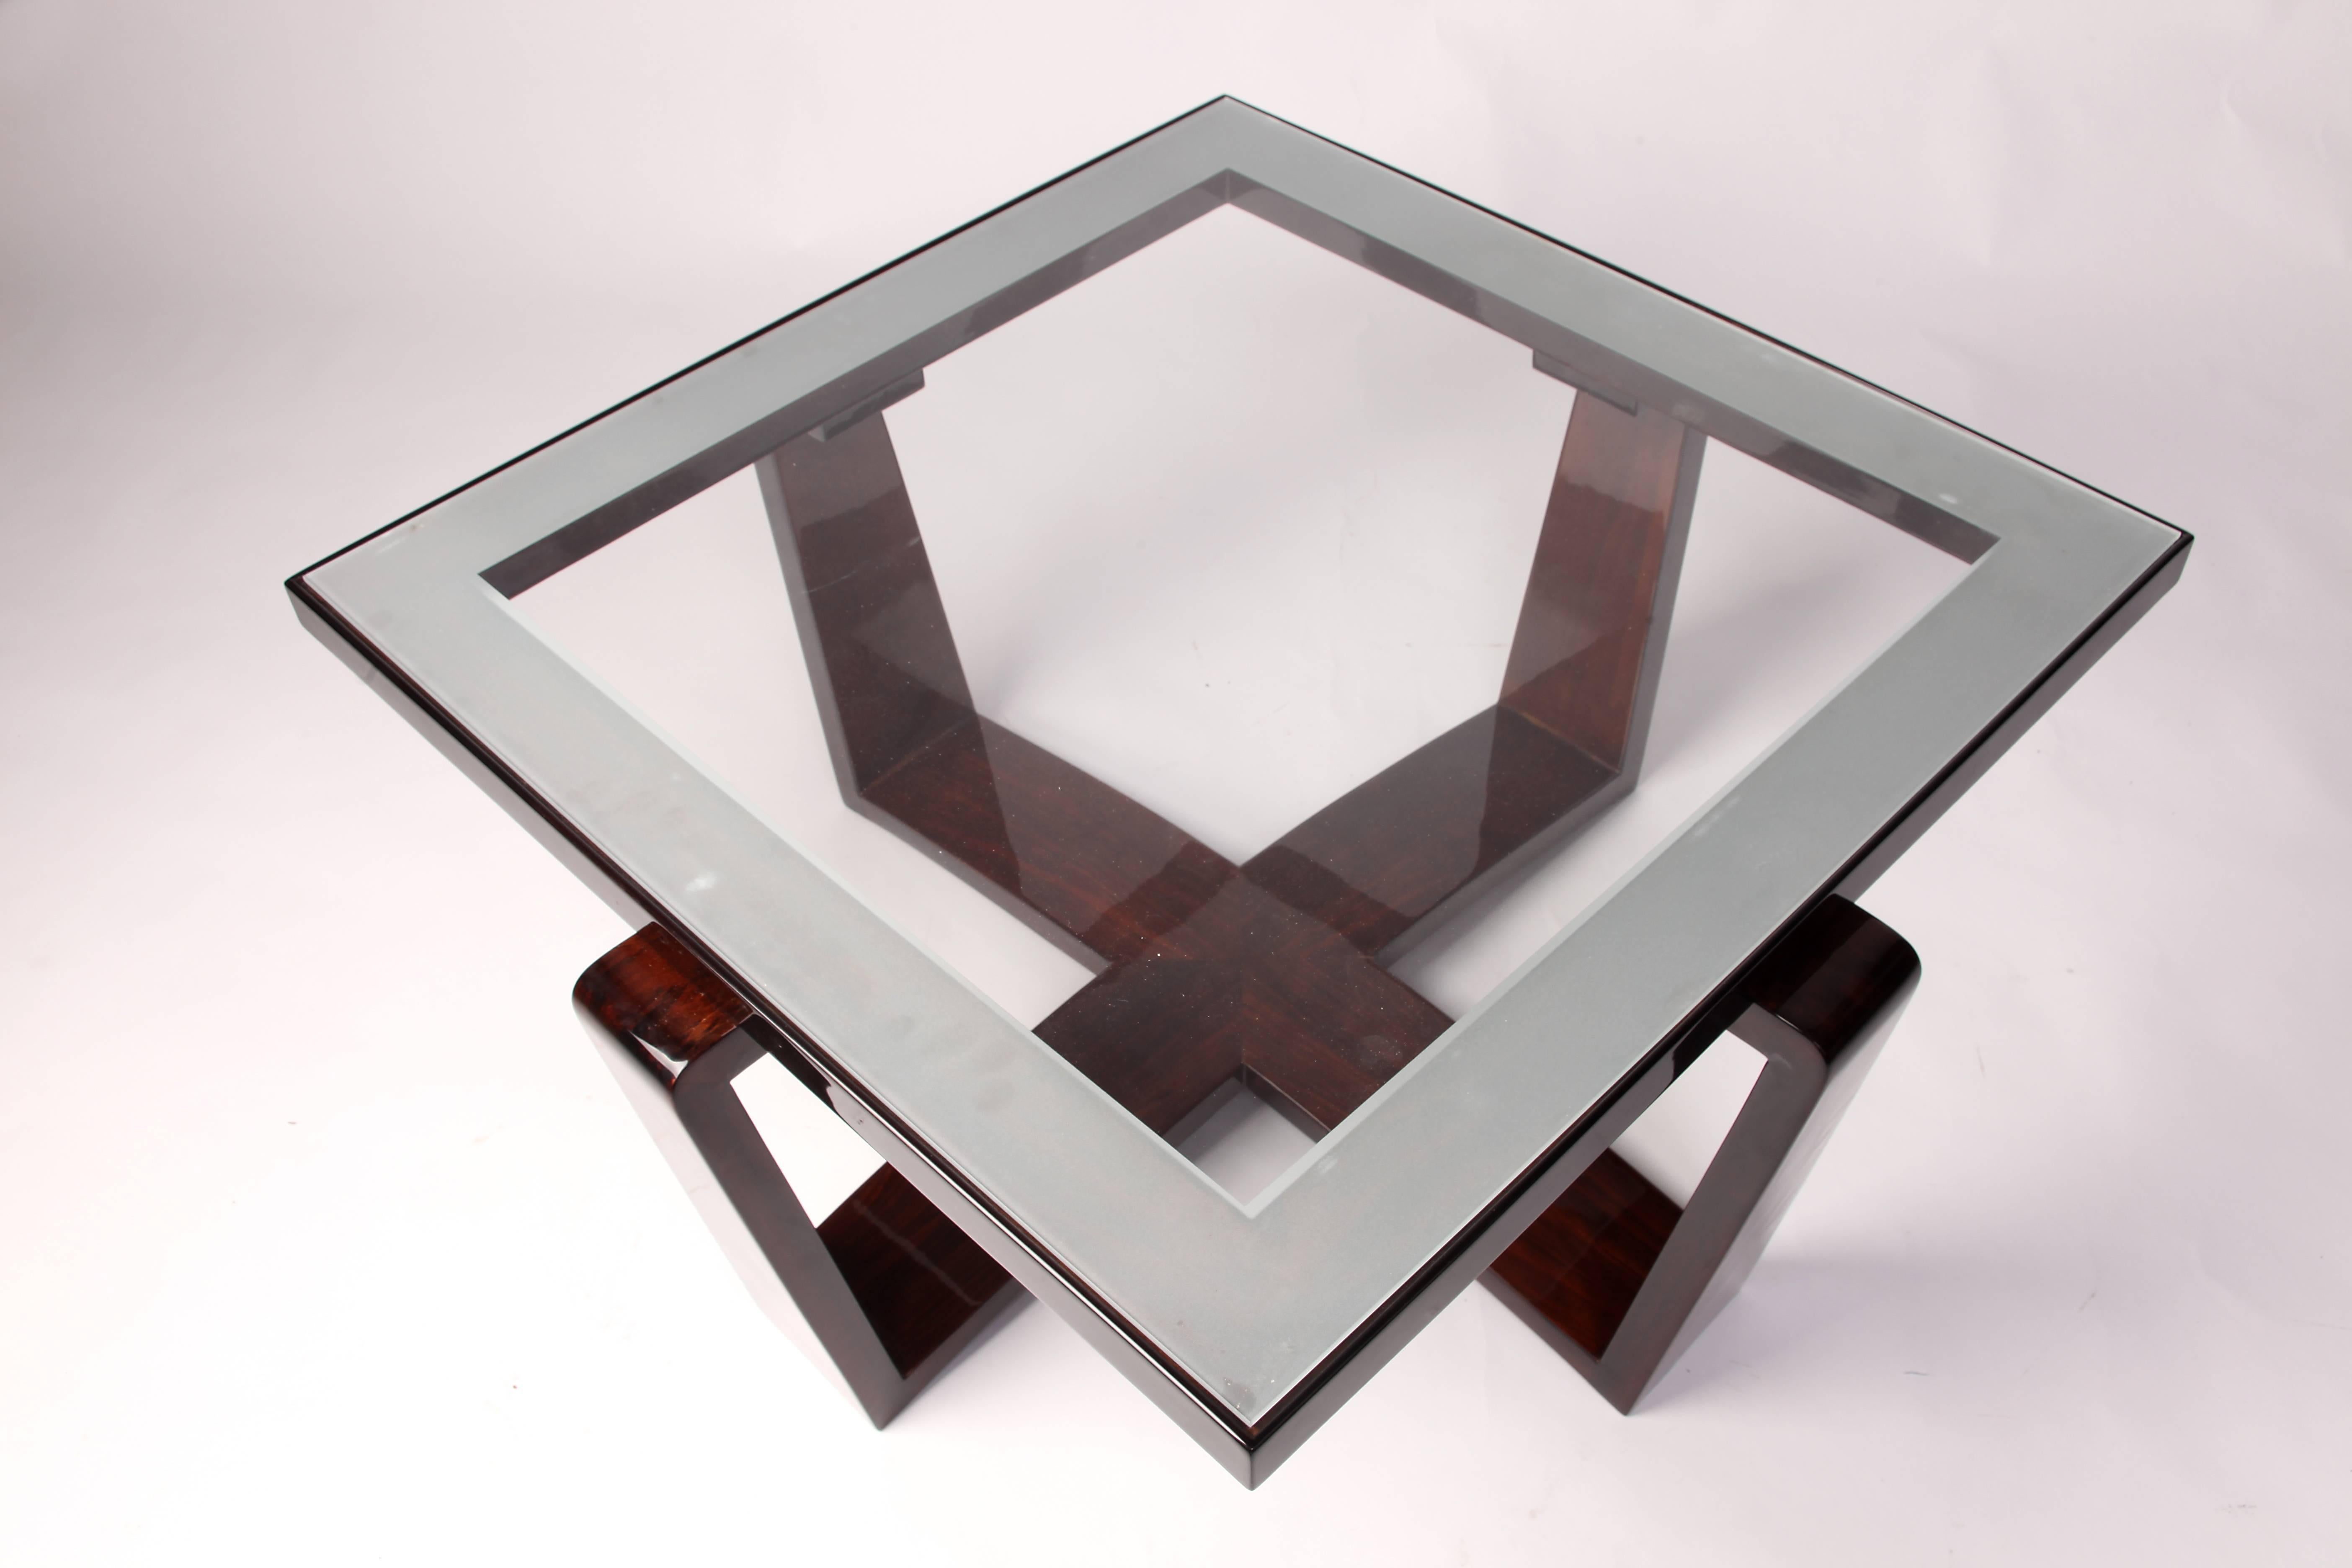 This modernist bentwood Bauhaus style coffee table from Hungary and is made from beech and glass.